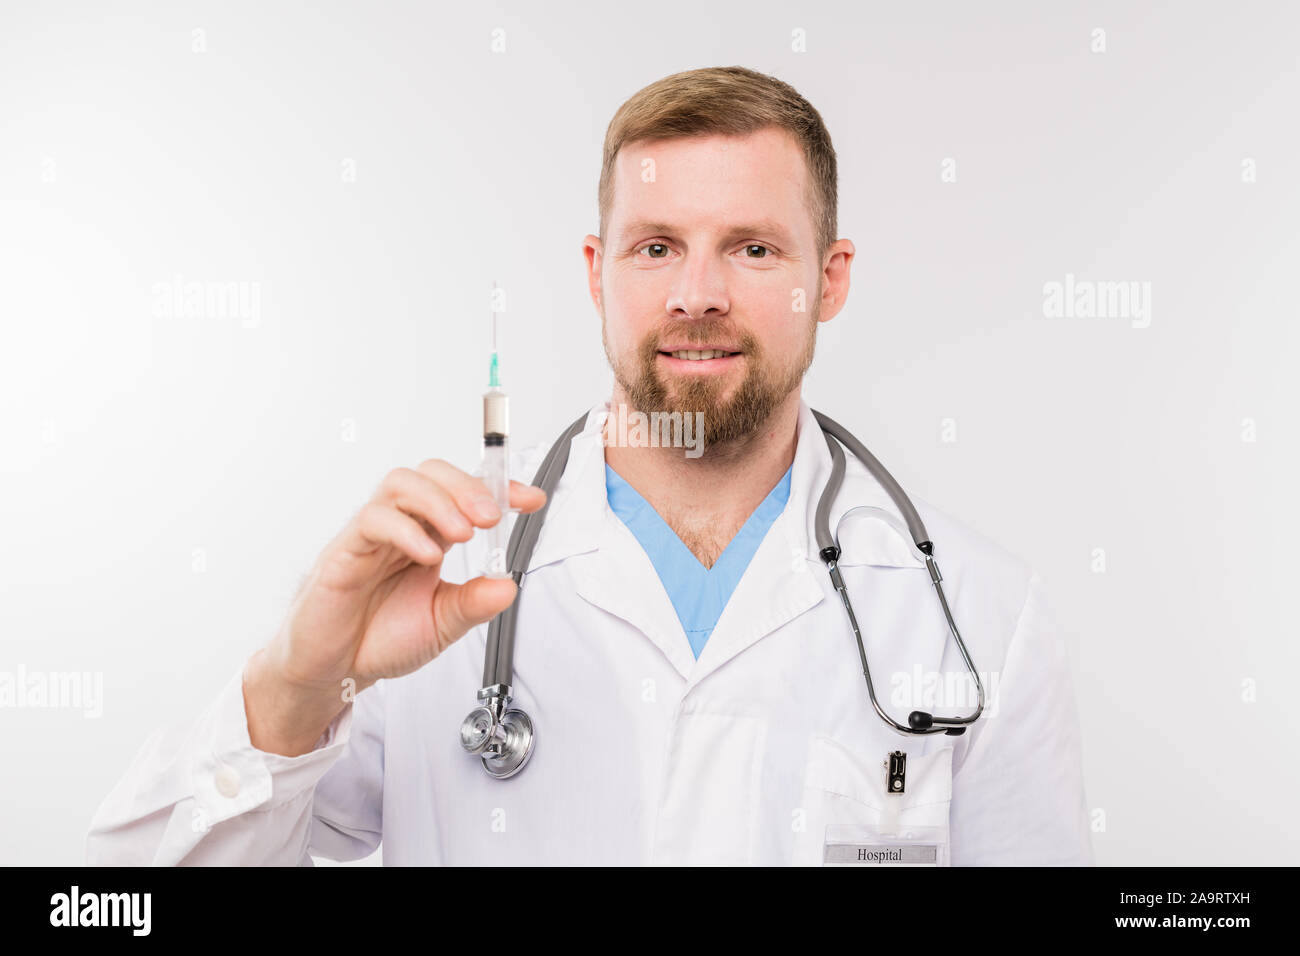 Successful Young Doctor With Stethoscope Holding Syringe In Front Of